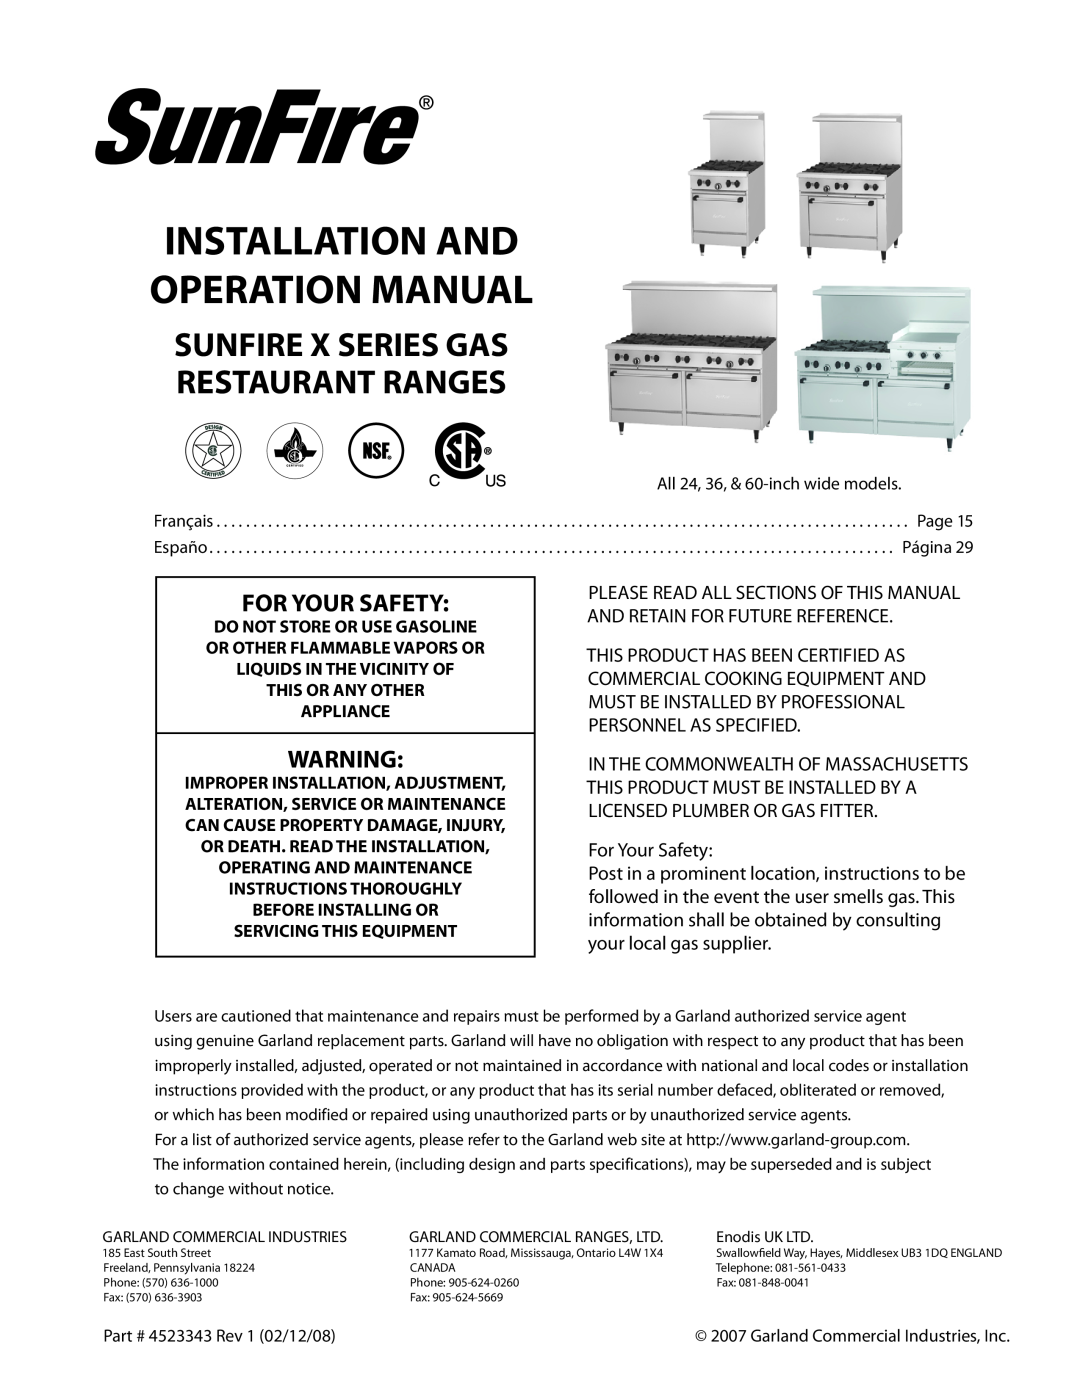 Sunfire operation manual For Your Safety, Sunfire X Series Gas Restaurant Ranges, This Or Any Other Appliance 